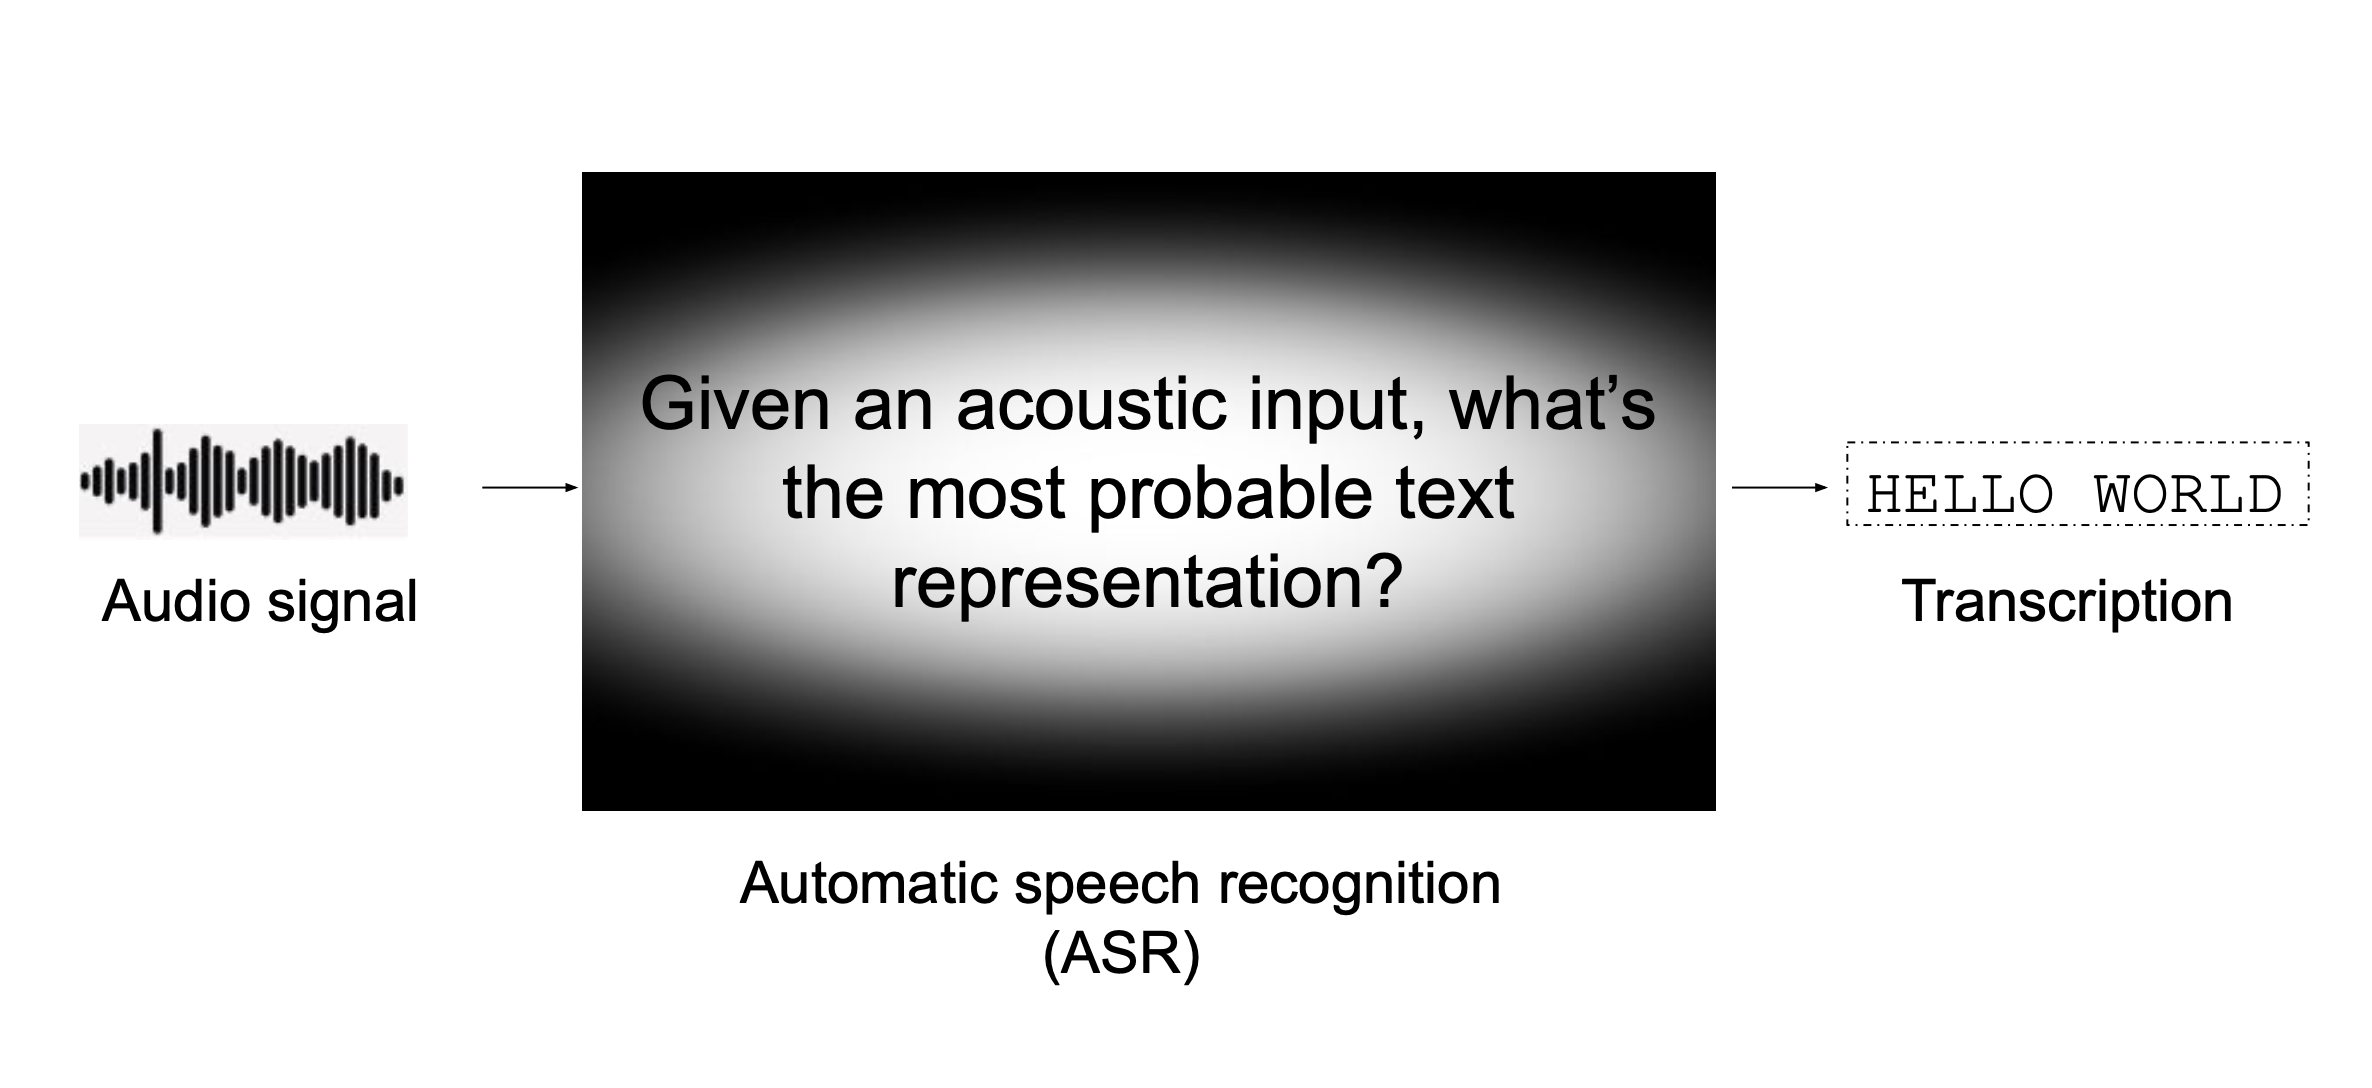 Automatic speech recognition is modelling the question ”What is the most probable word sequence among all possible word sequences given an acoustic input?”